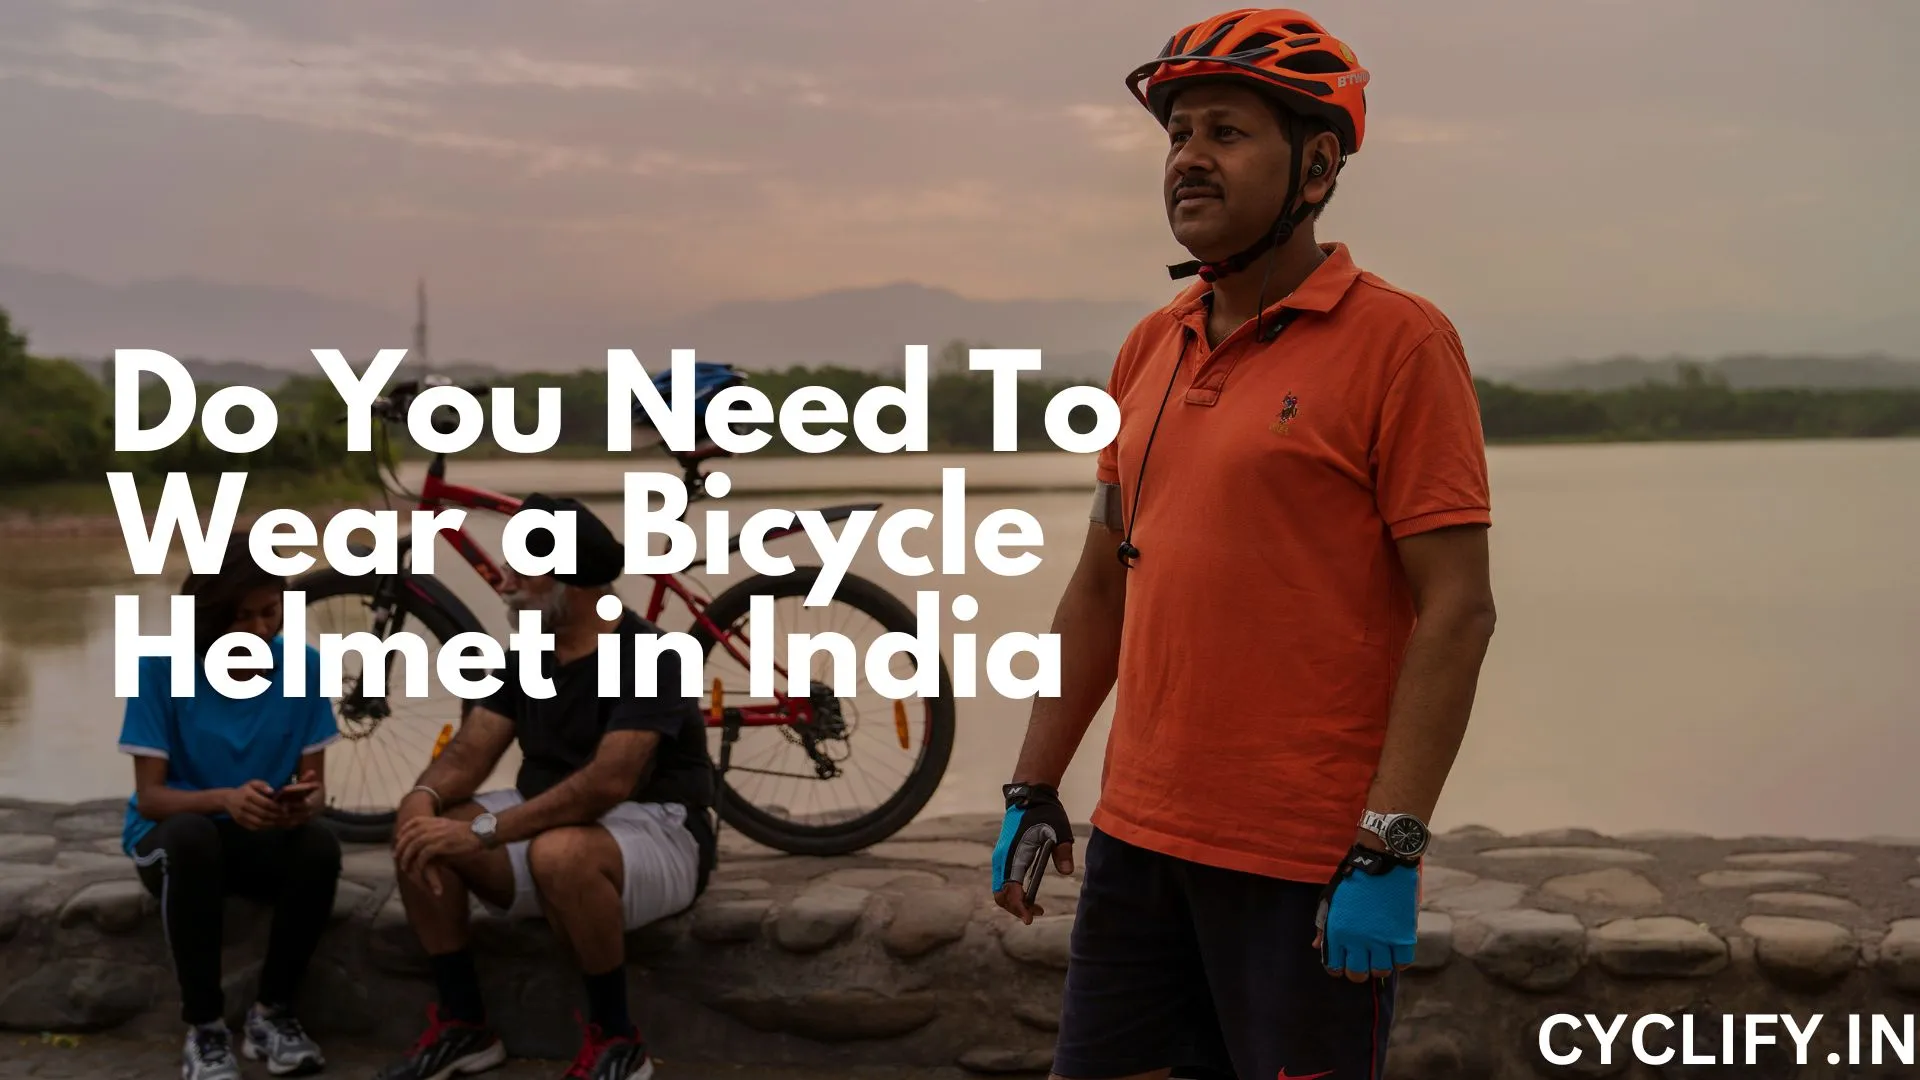 Do you need to wear a bicycle helmet in India?